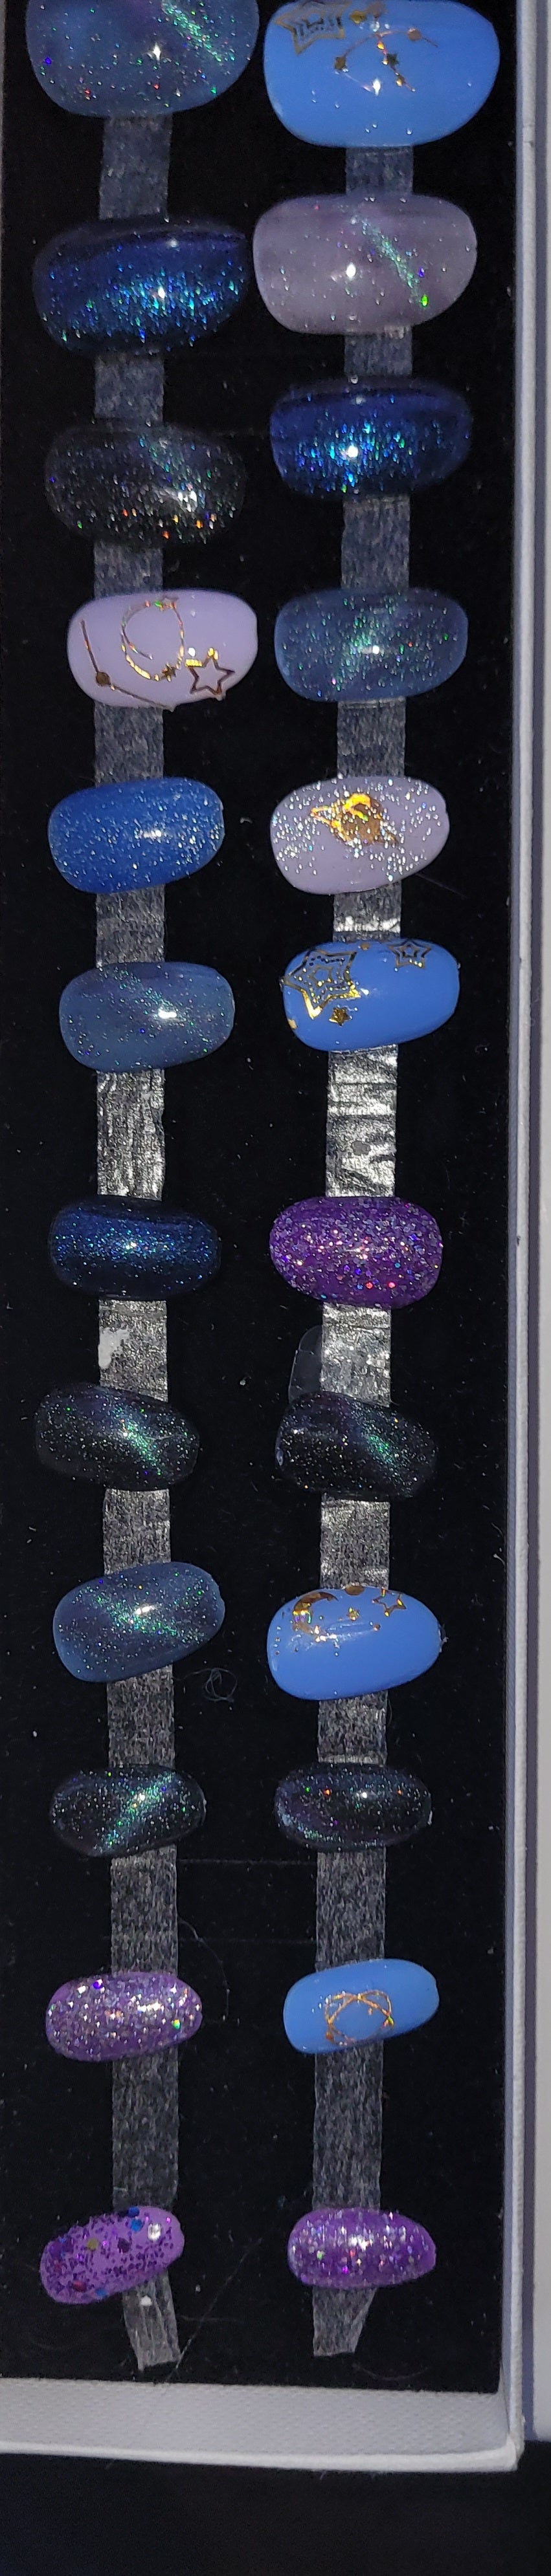 Cosmic Hand-painted Press-on Nails